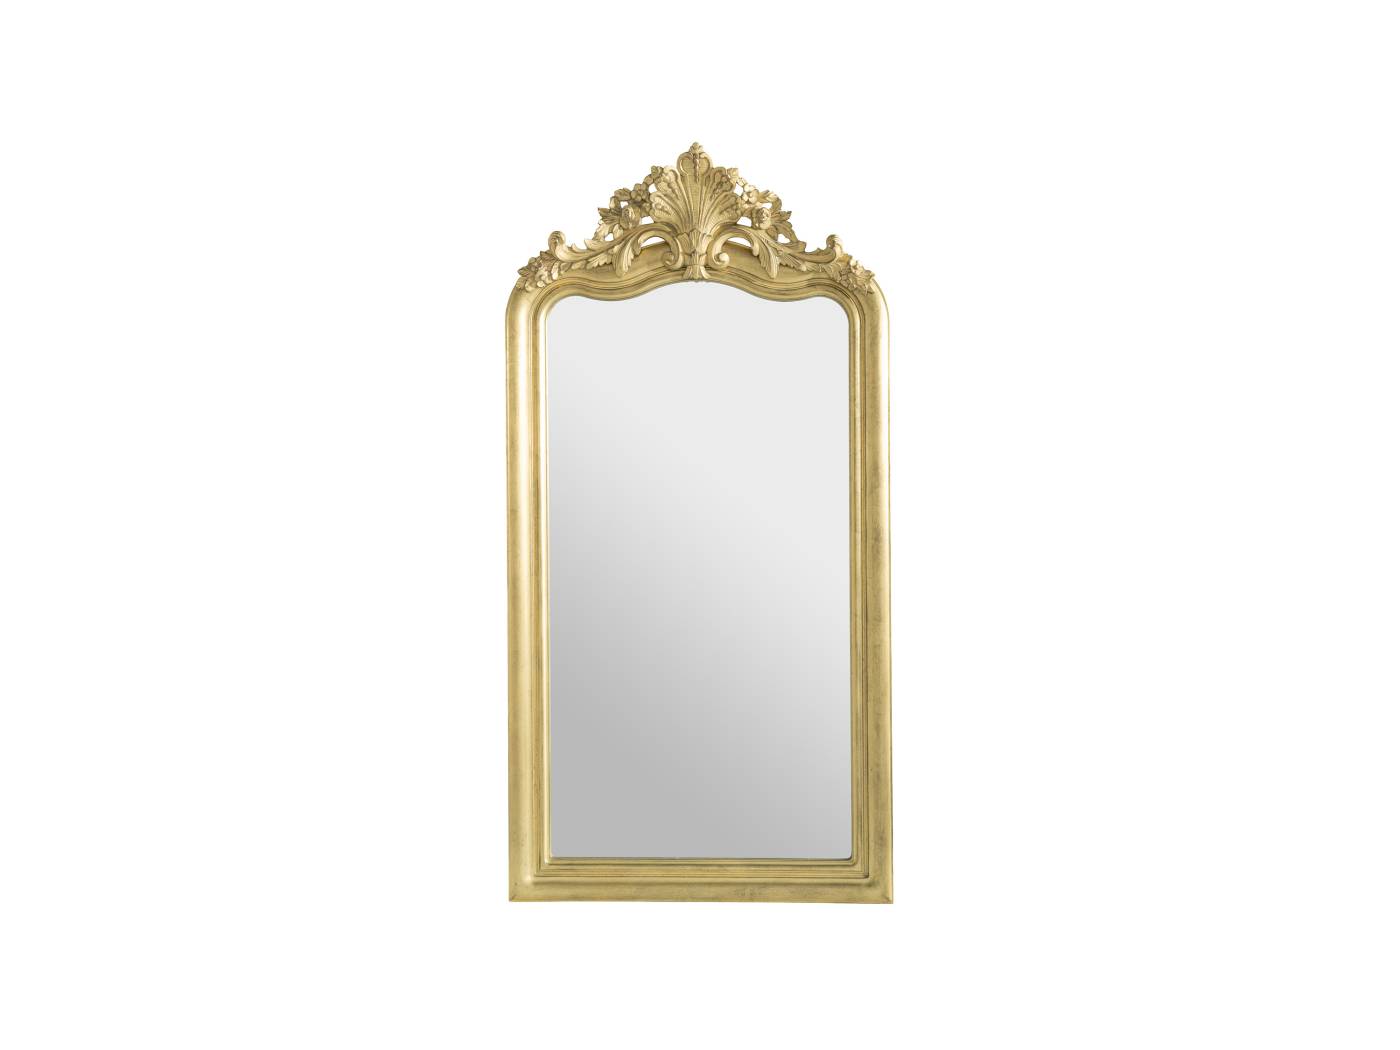 AGUILLE mirror - Discover the elegance of luxury Héritage collection by Jumbo collection